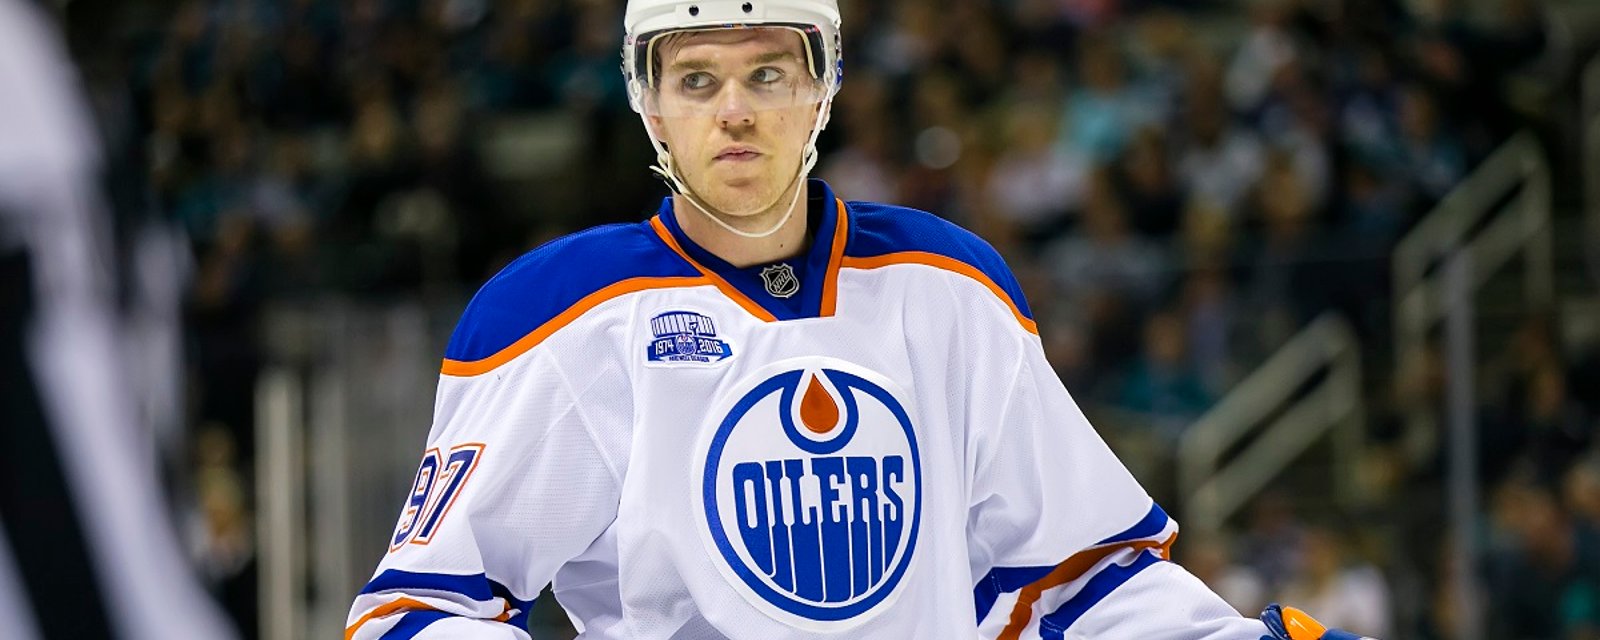 Oilers cap off a huge surge this week thanks to McDavid and Draisaitl.